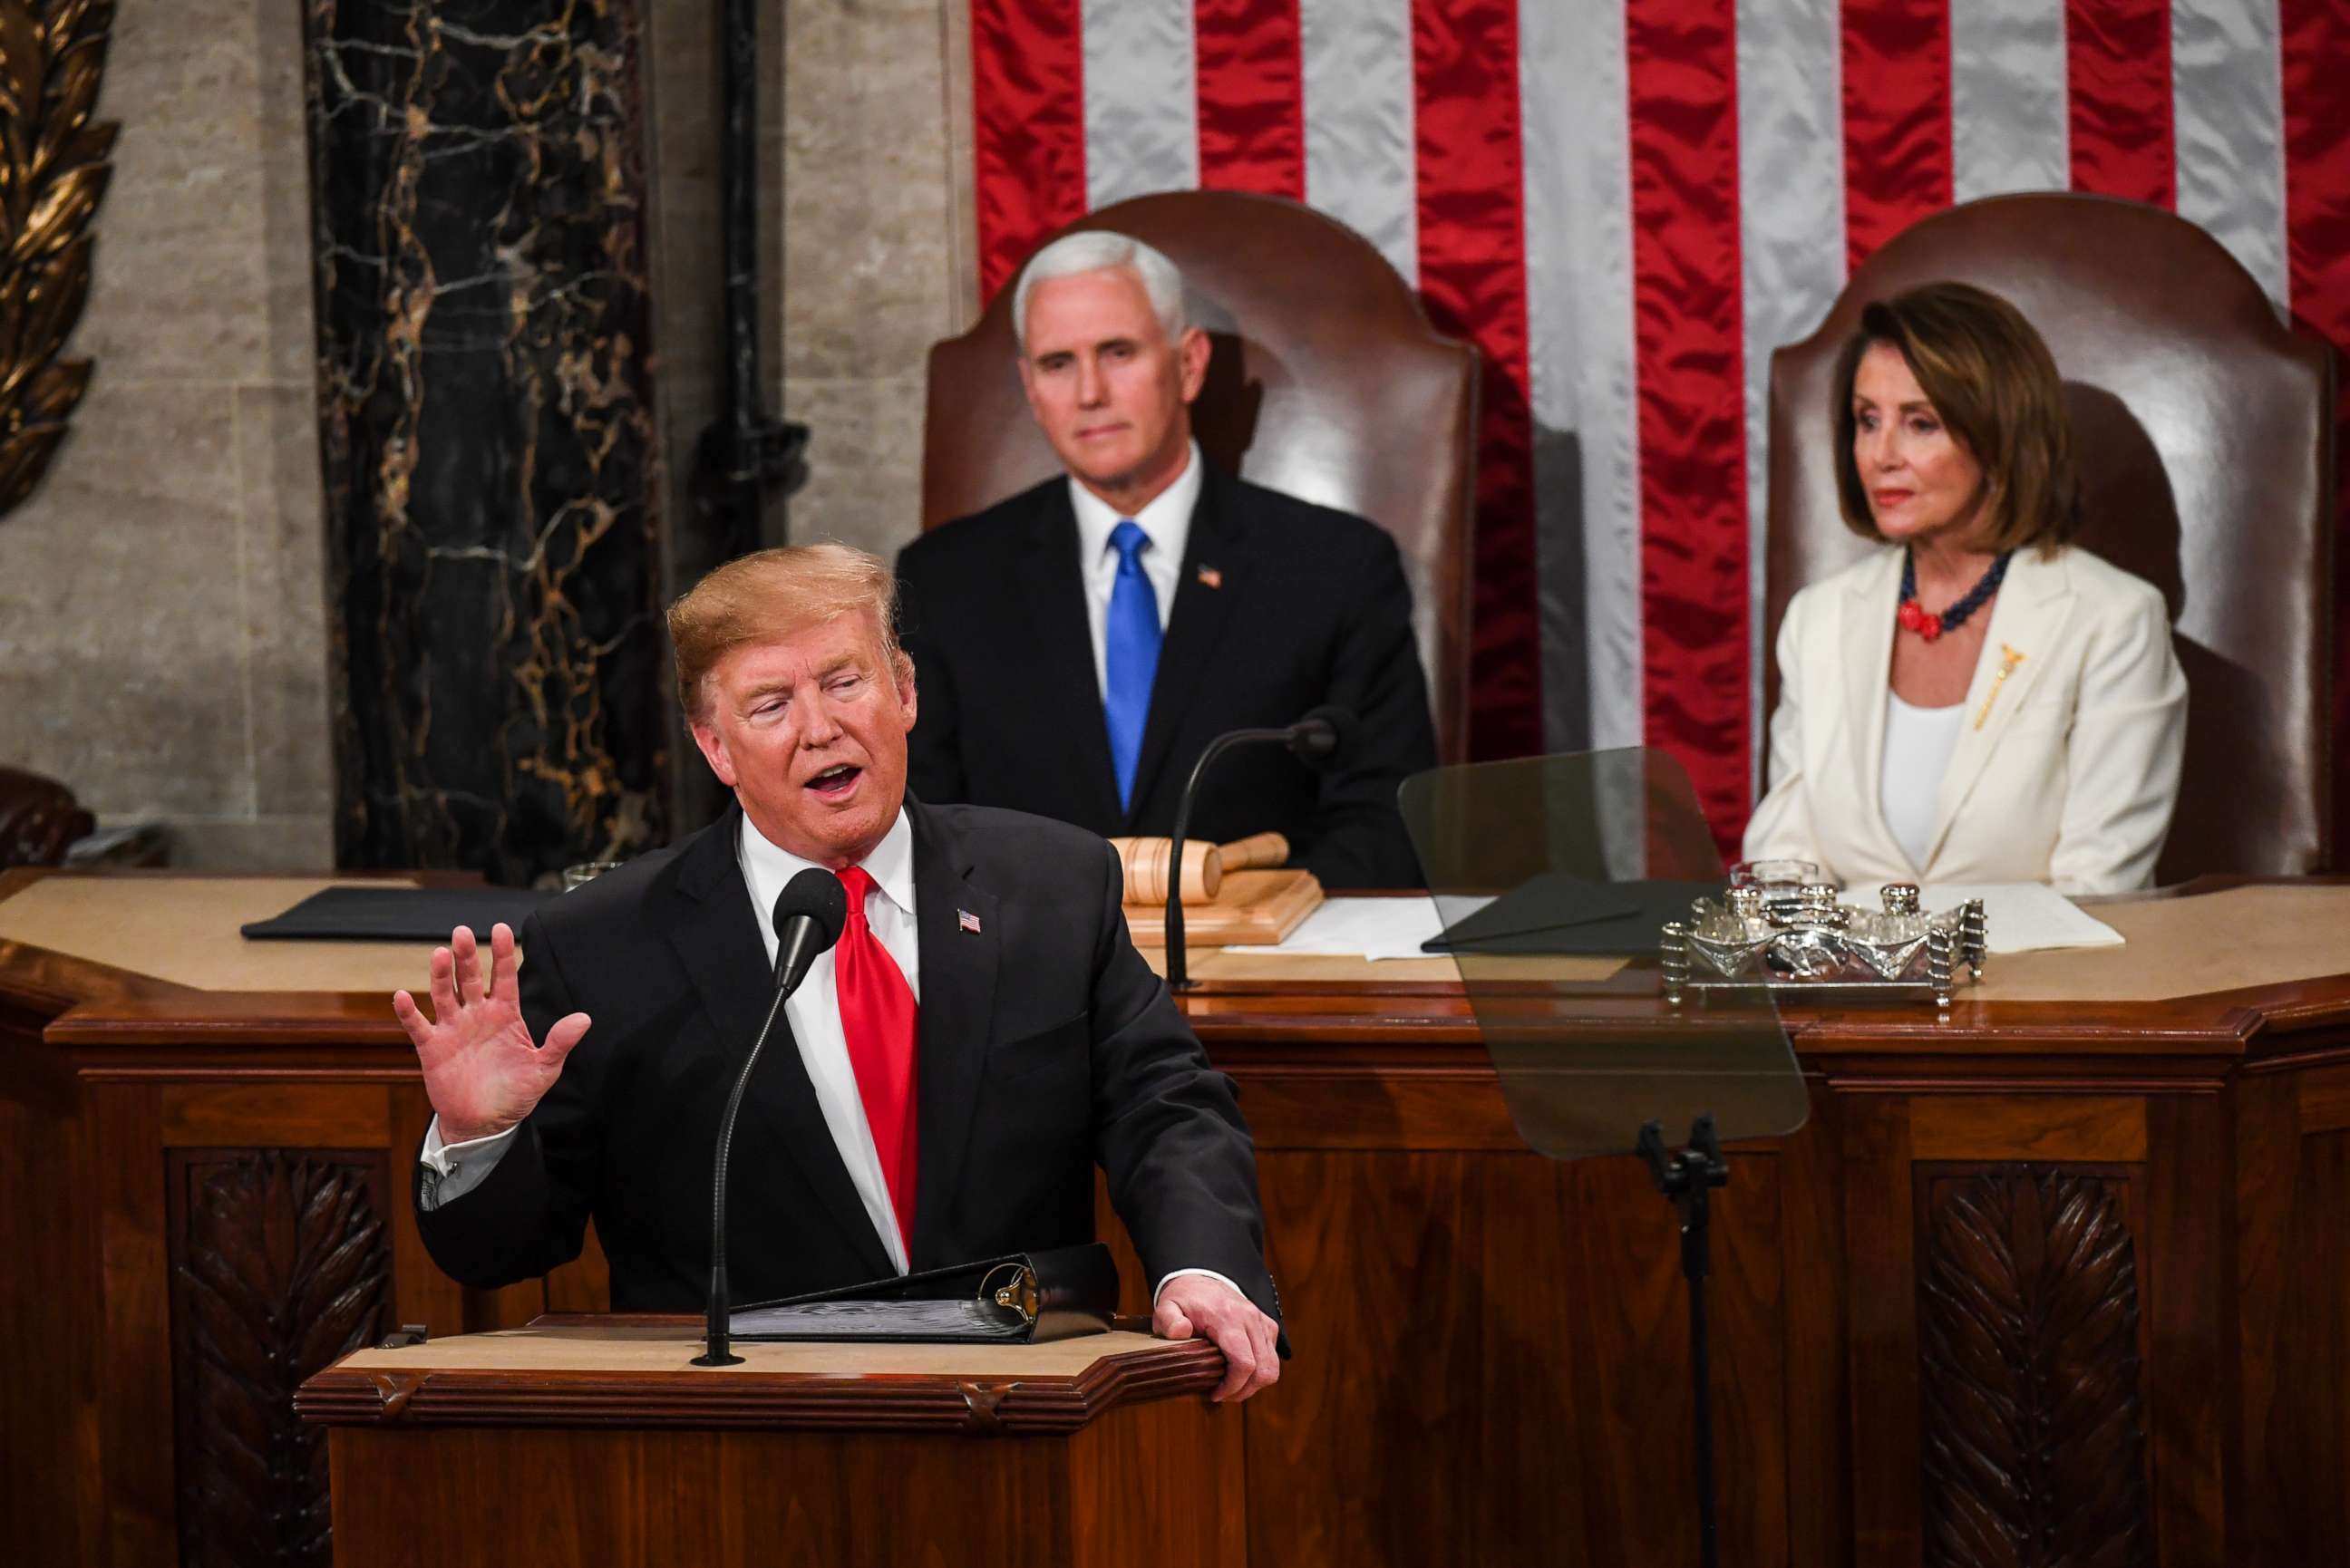 PHOTO: President Donald J. Trump, in front of Vice President Mike Pence and House Speaker Nancy Pelosi (D-Calif.) delivers his State of the Union address before members of Congress in the House chamber of the U.S. Capitol February 5, 2019 in Washington.